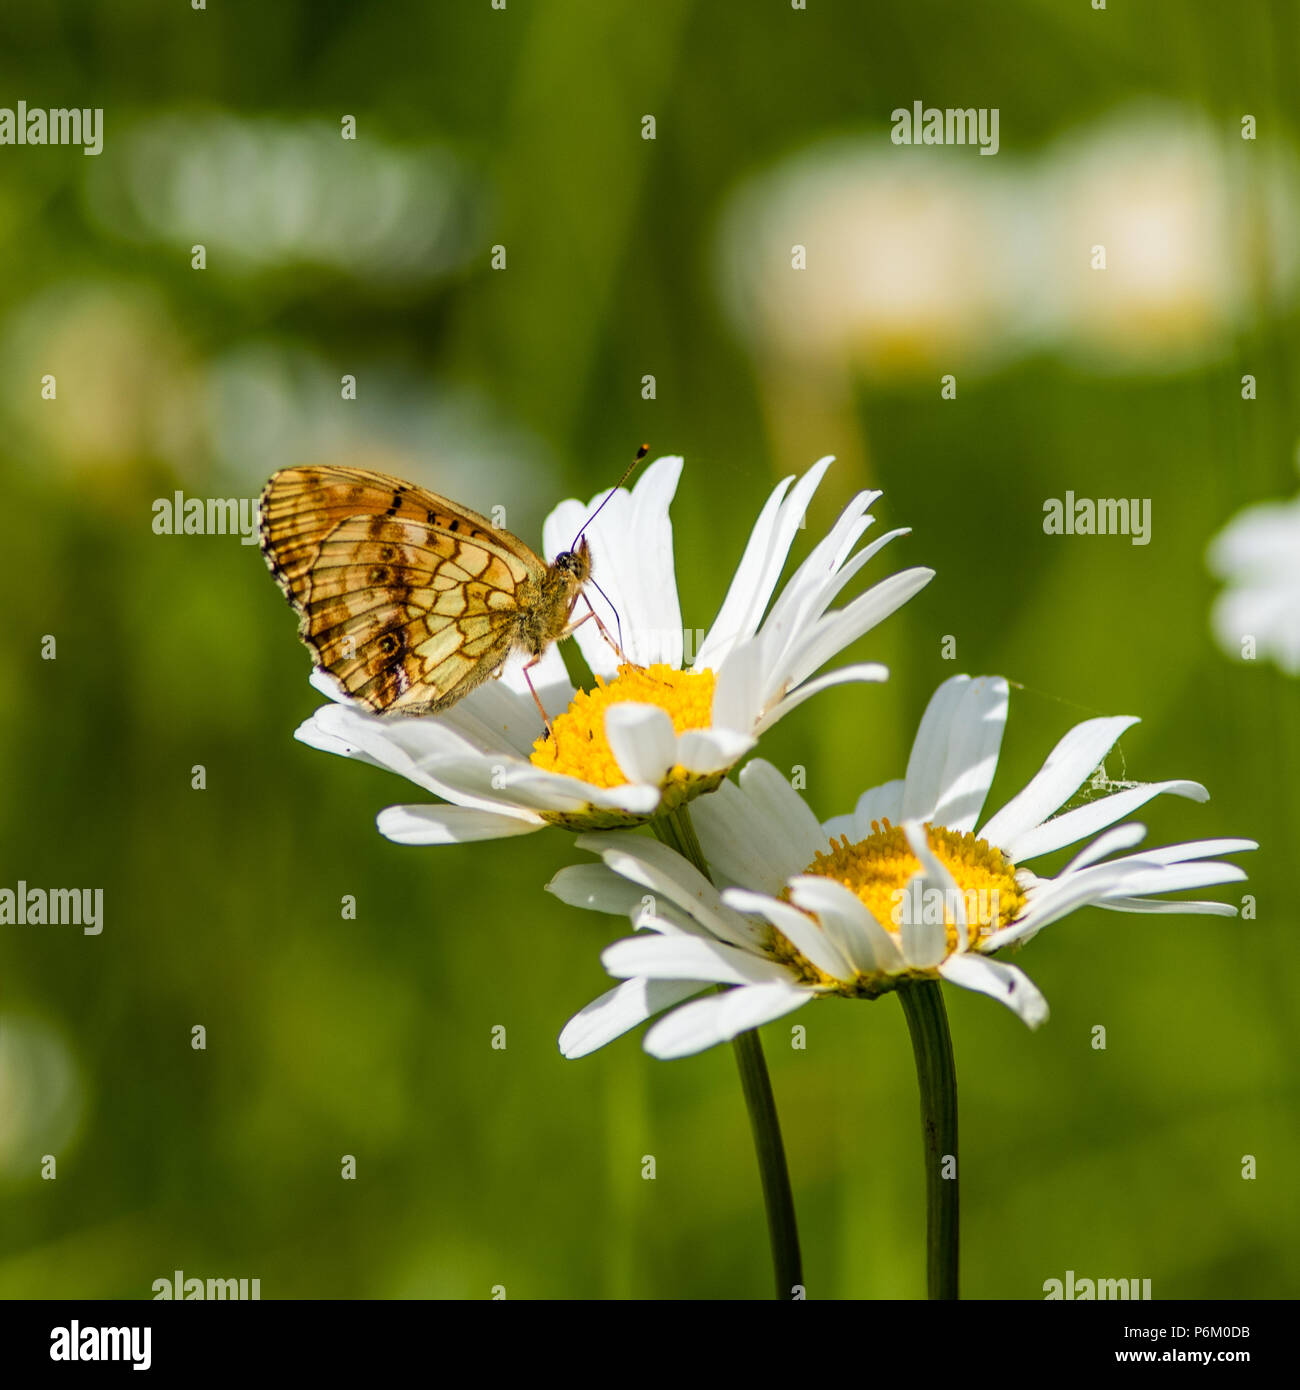 In the summer meadow the beautiful Lesser Marbled Fritillary Butterfly (Brenthis ino) suck nectar from a flowering Ox-eye Daisy (Leucanthemum vulgare) Stock Photo